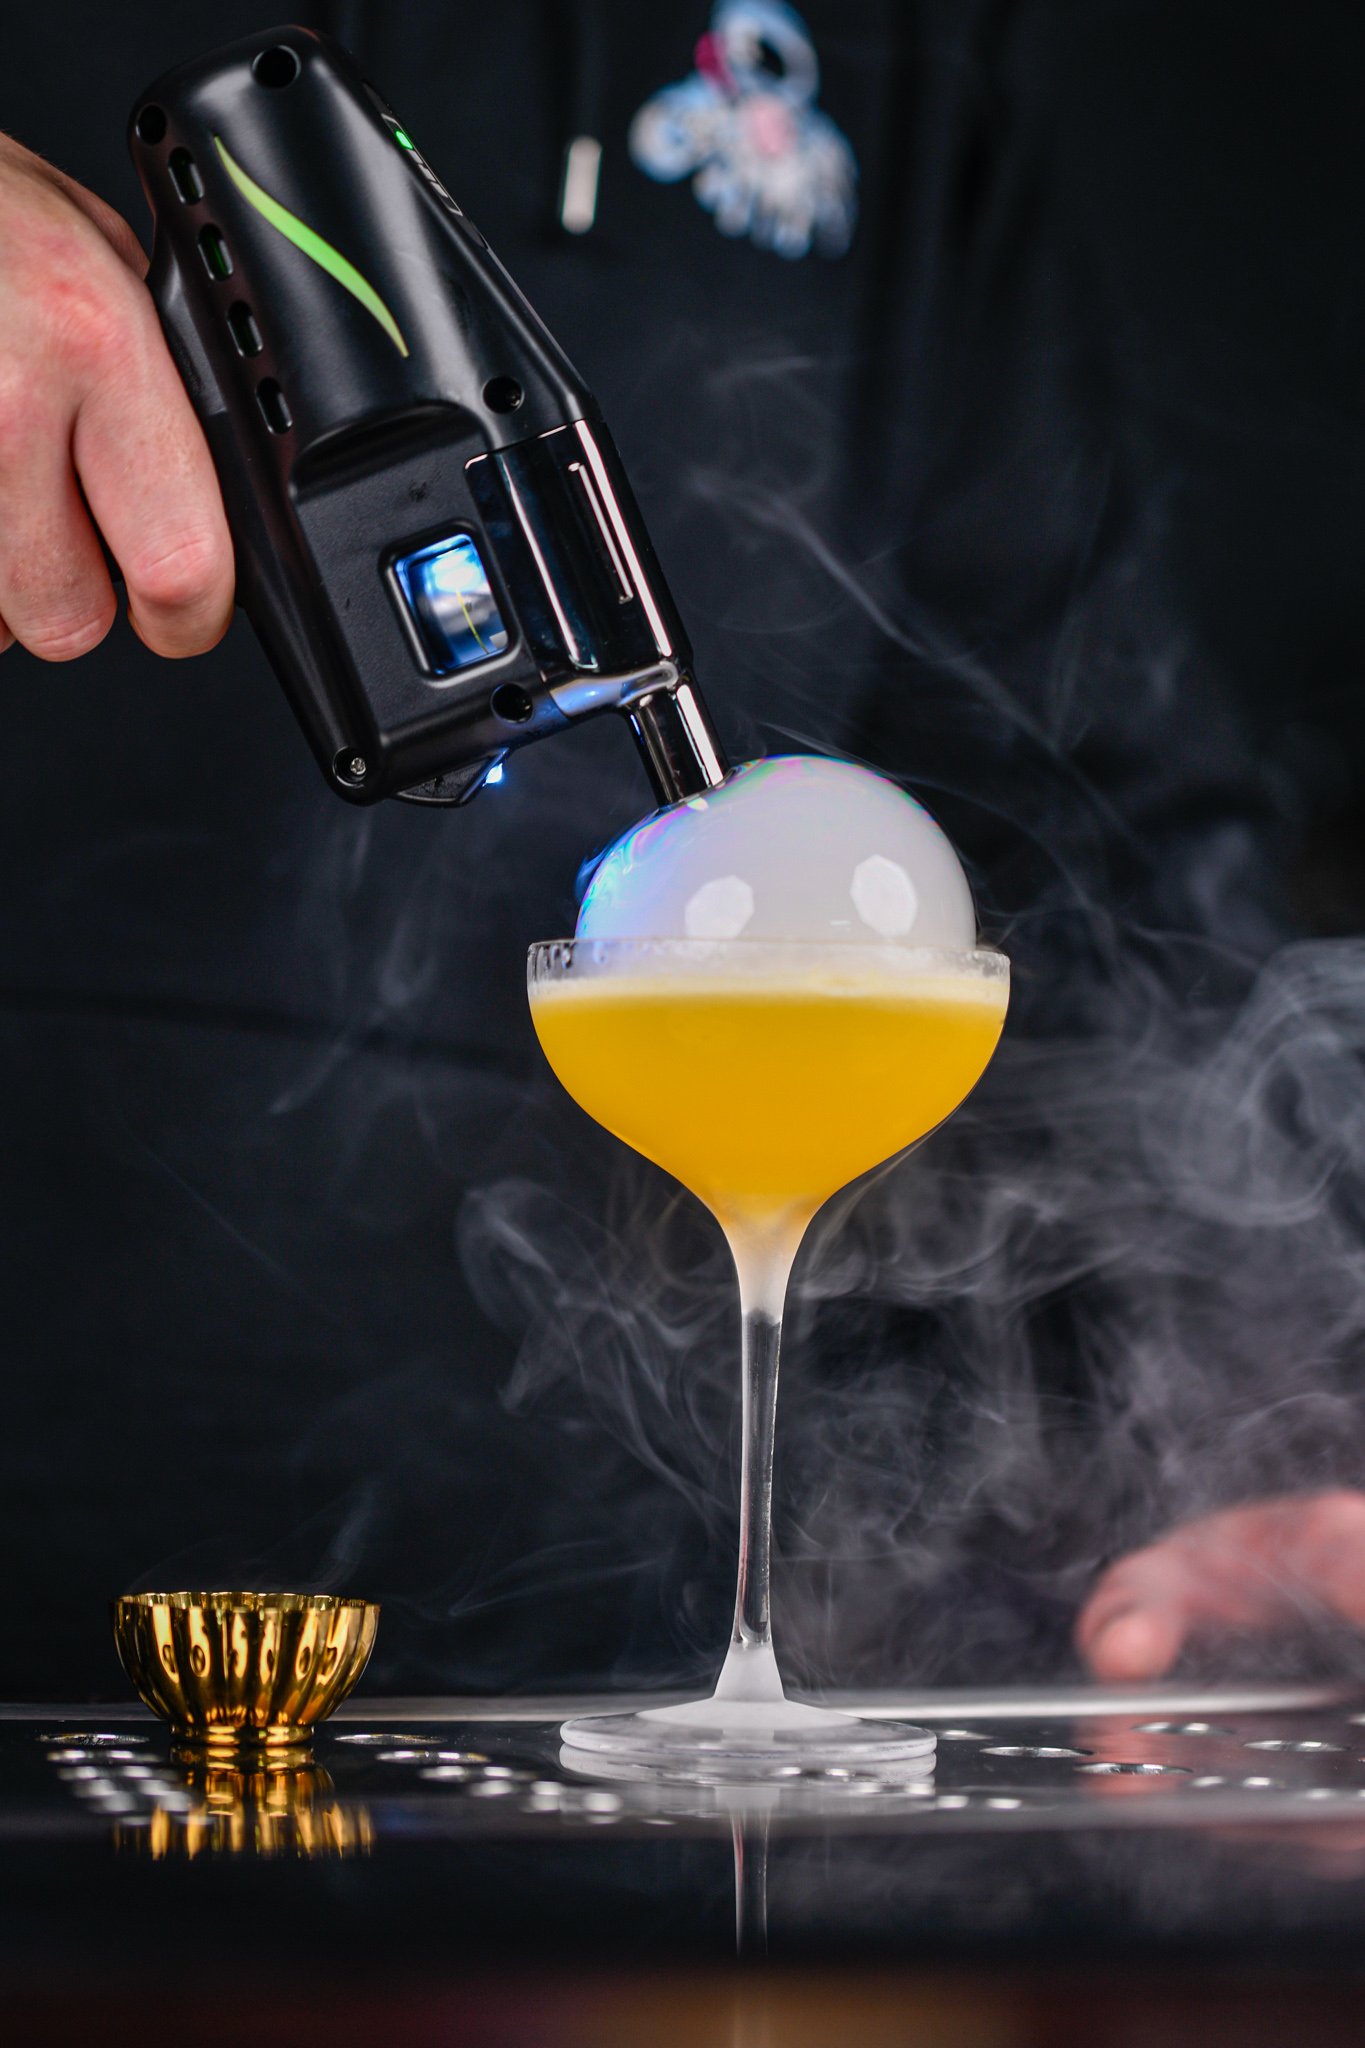 Smoke Bubbles Are Adding Aroma & Whimsy to Cocktails